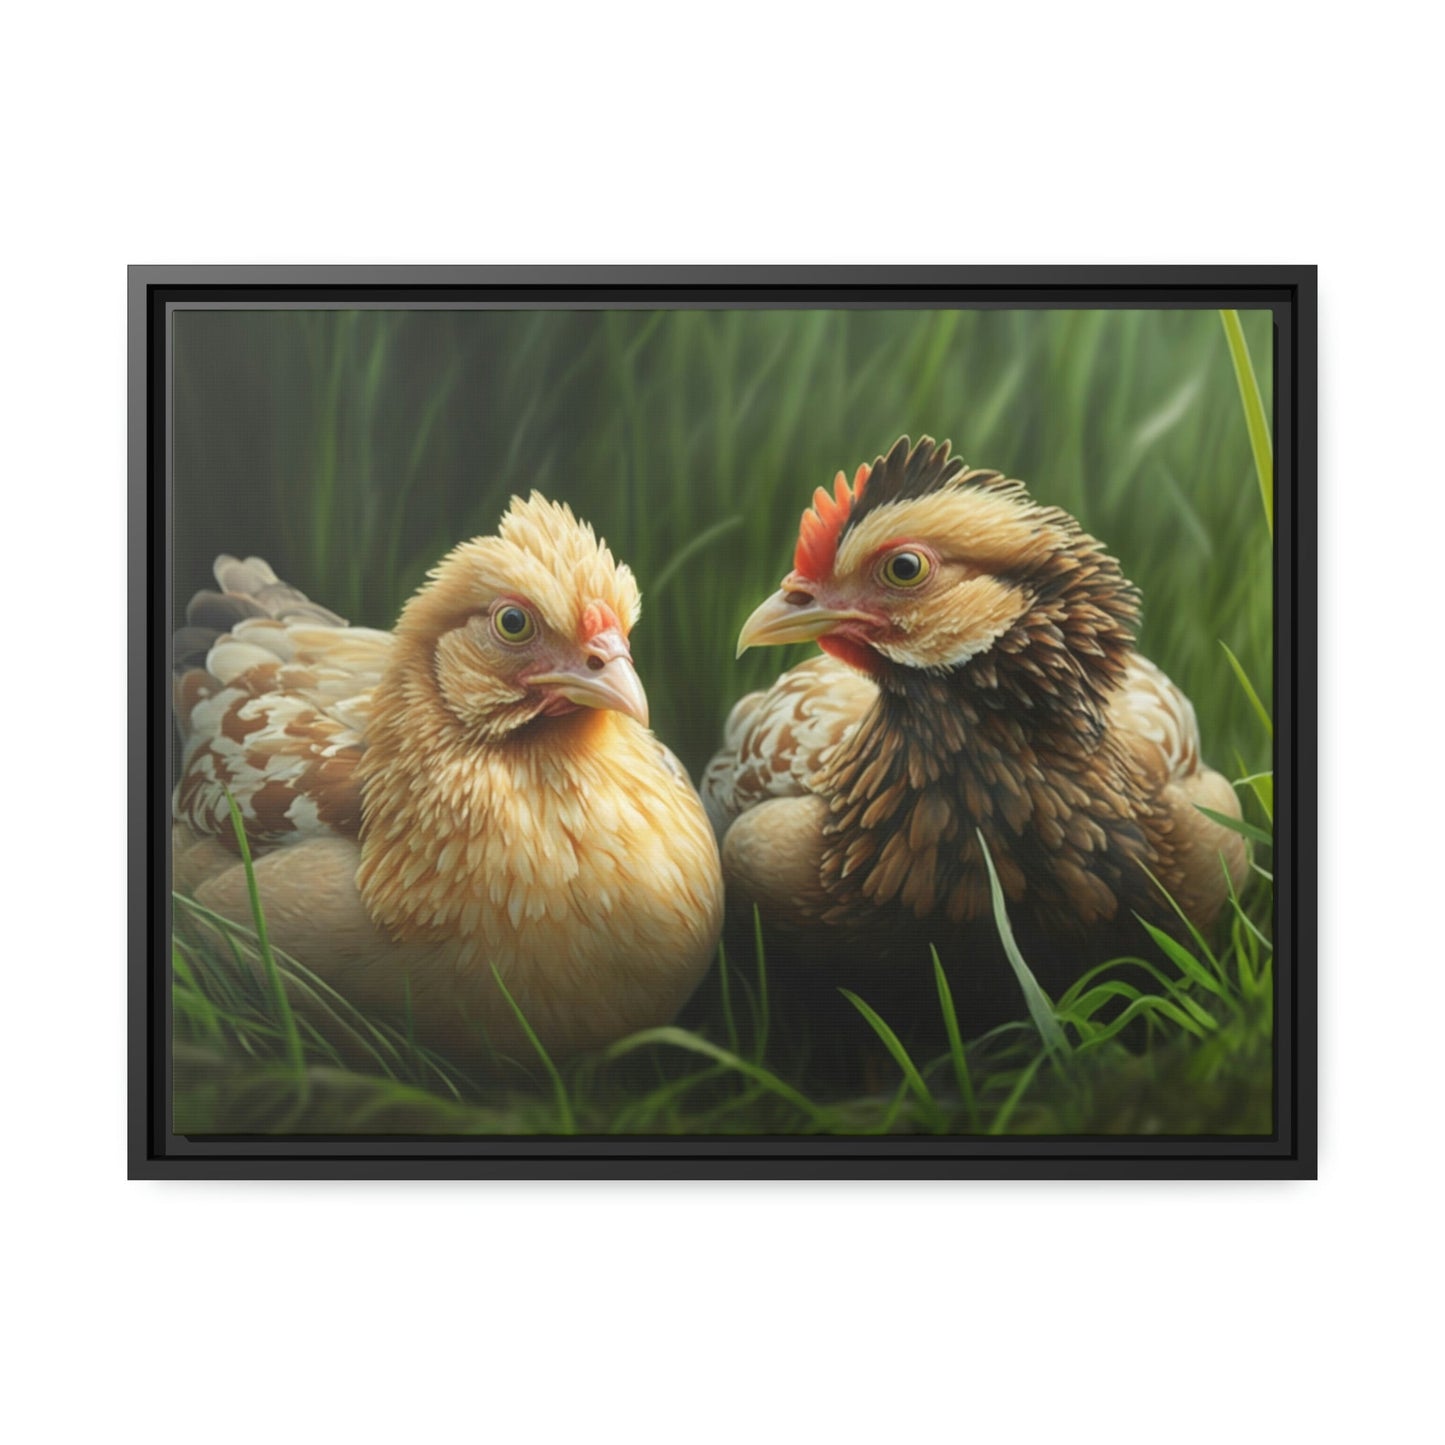 Rustic Henhouse: Framed Canvas with Delightful Chickens